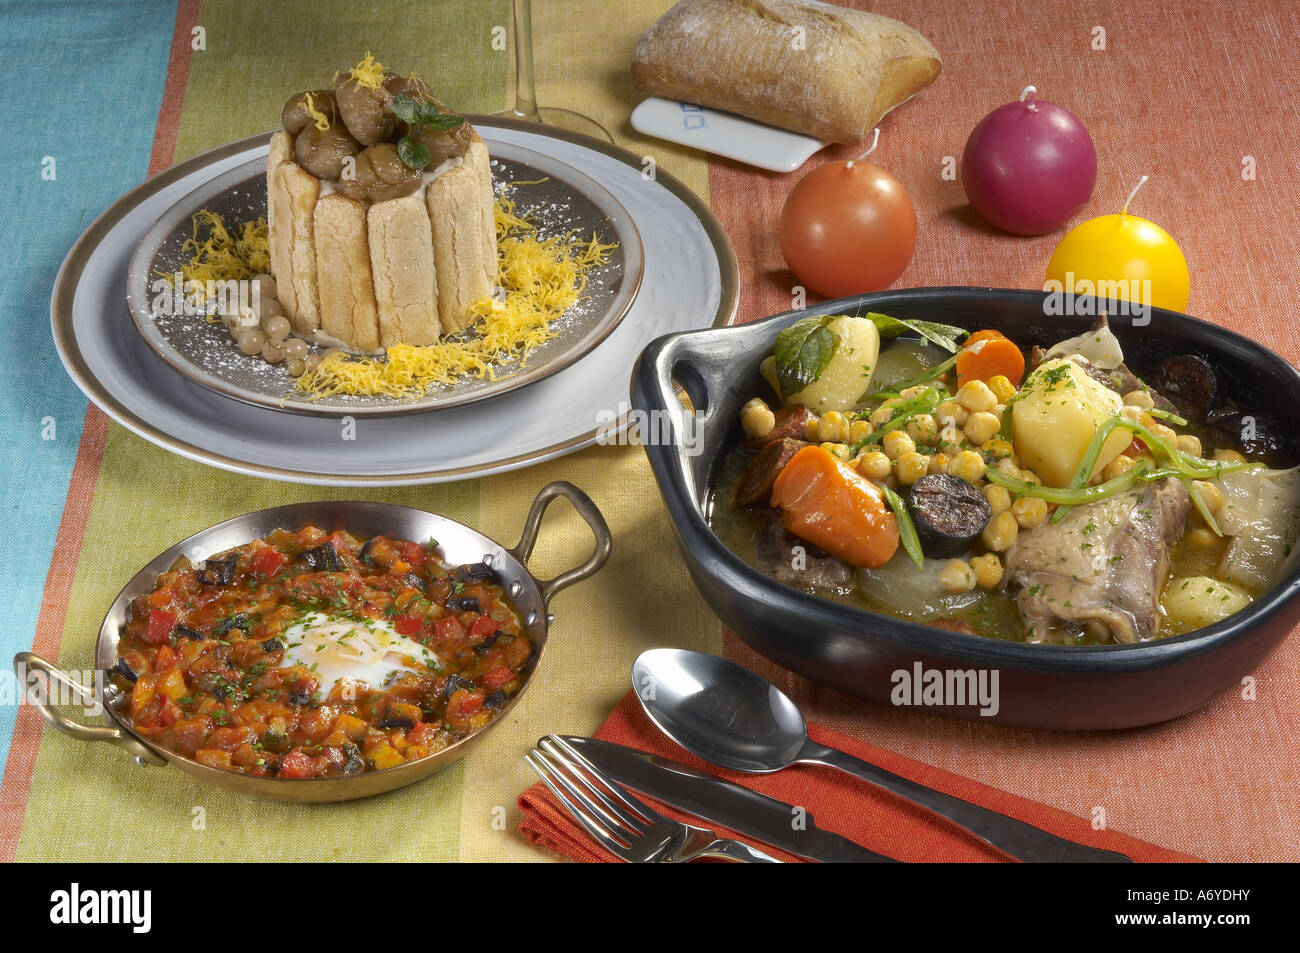 Menu of chickpea stew with beef egg casserole with vegetables and marron glacé charlotte Stock Photo